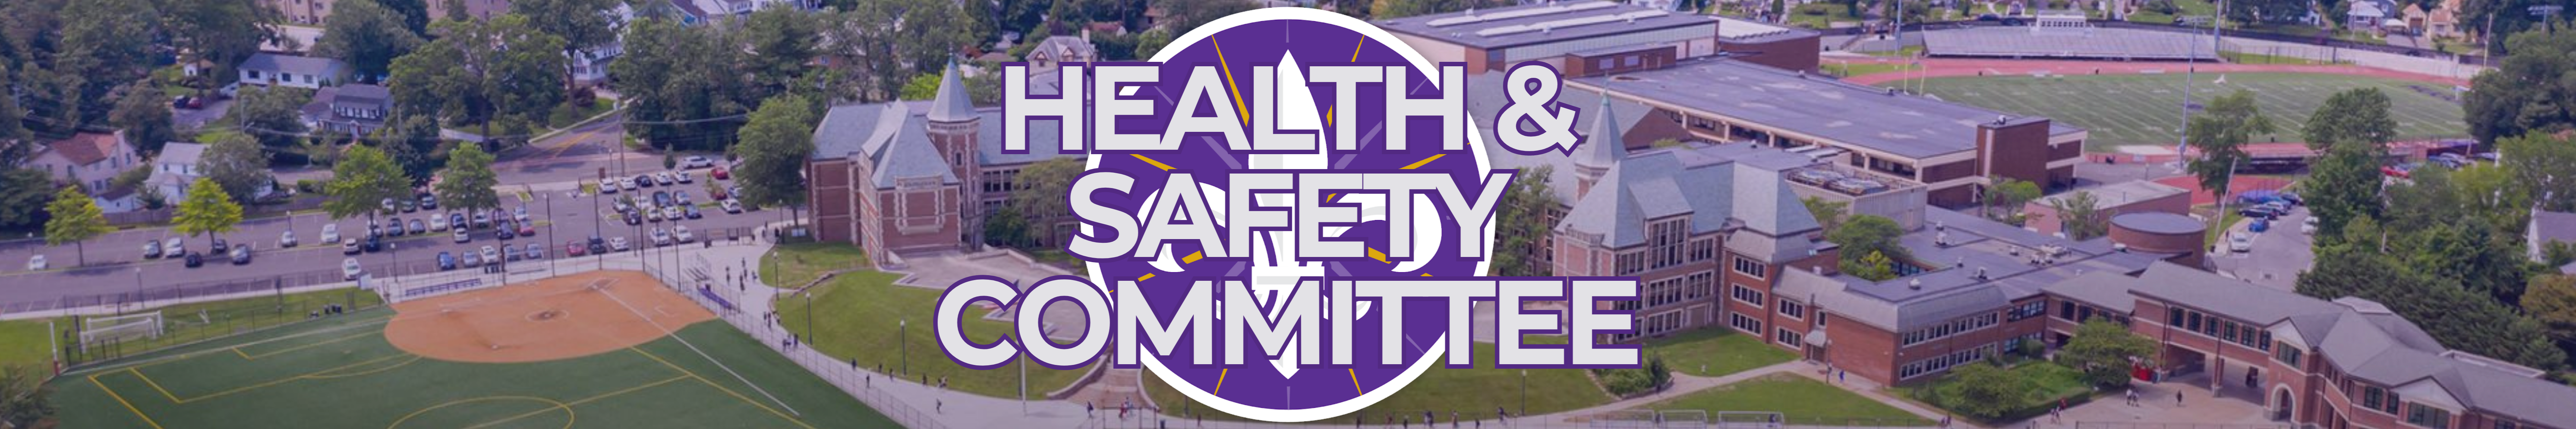 Health & Safety Committee banner